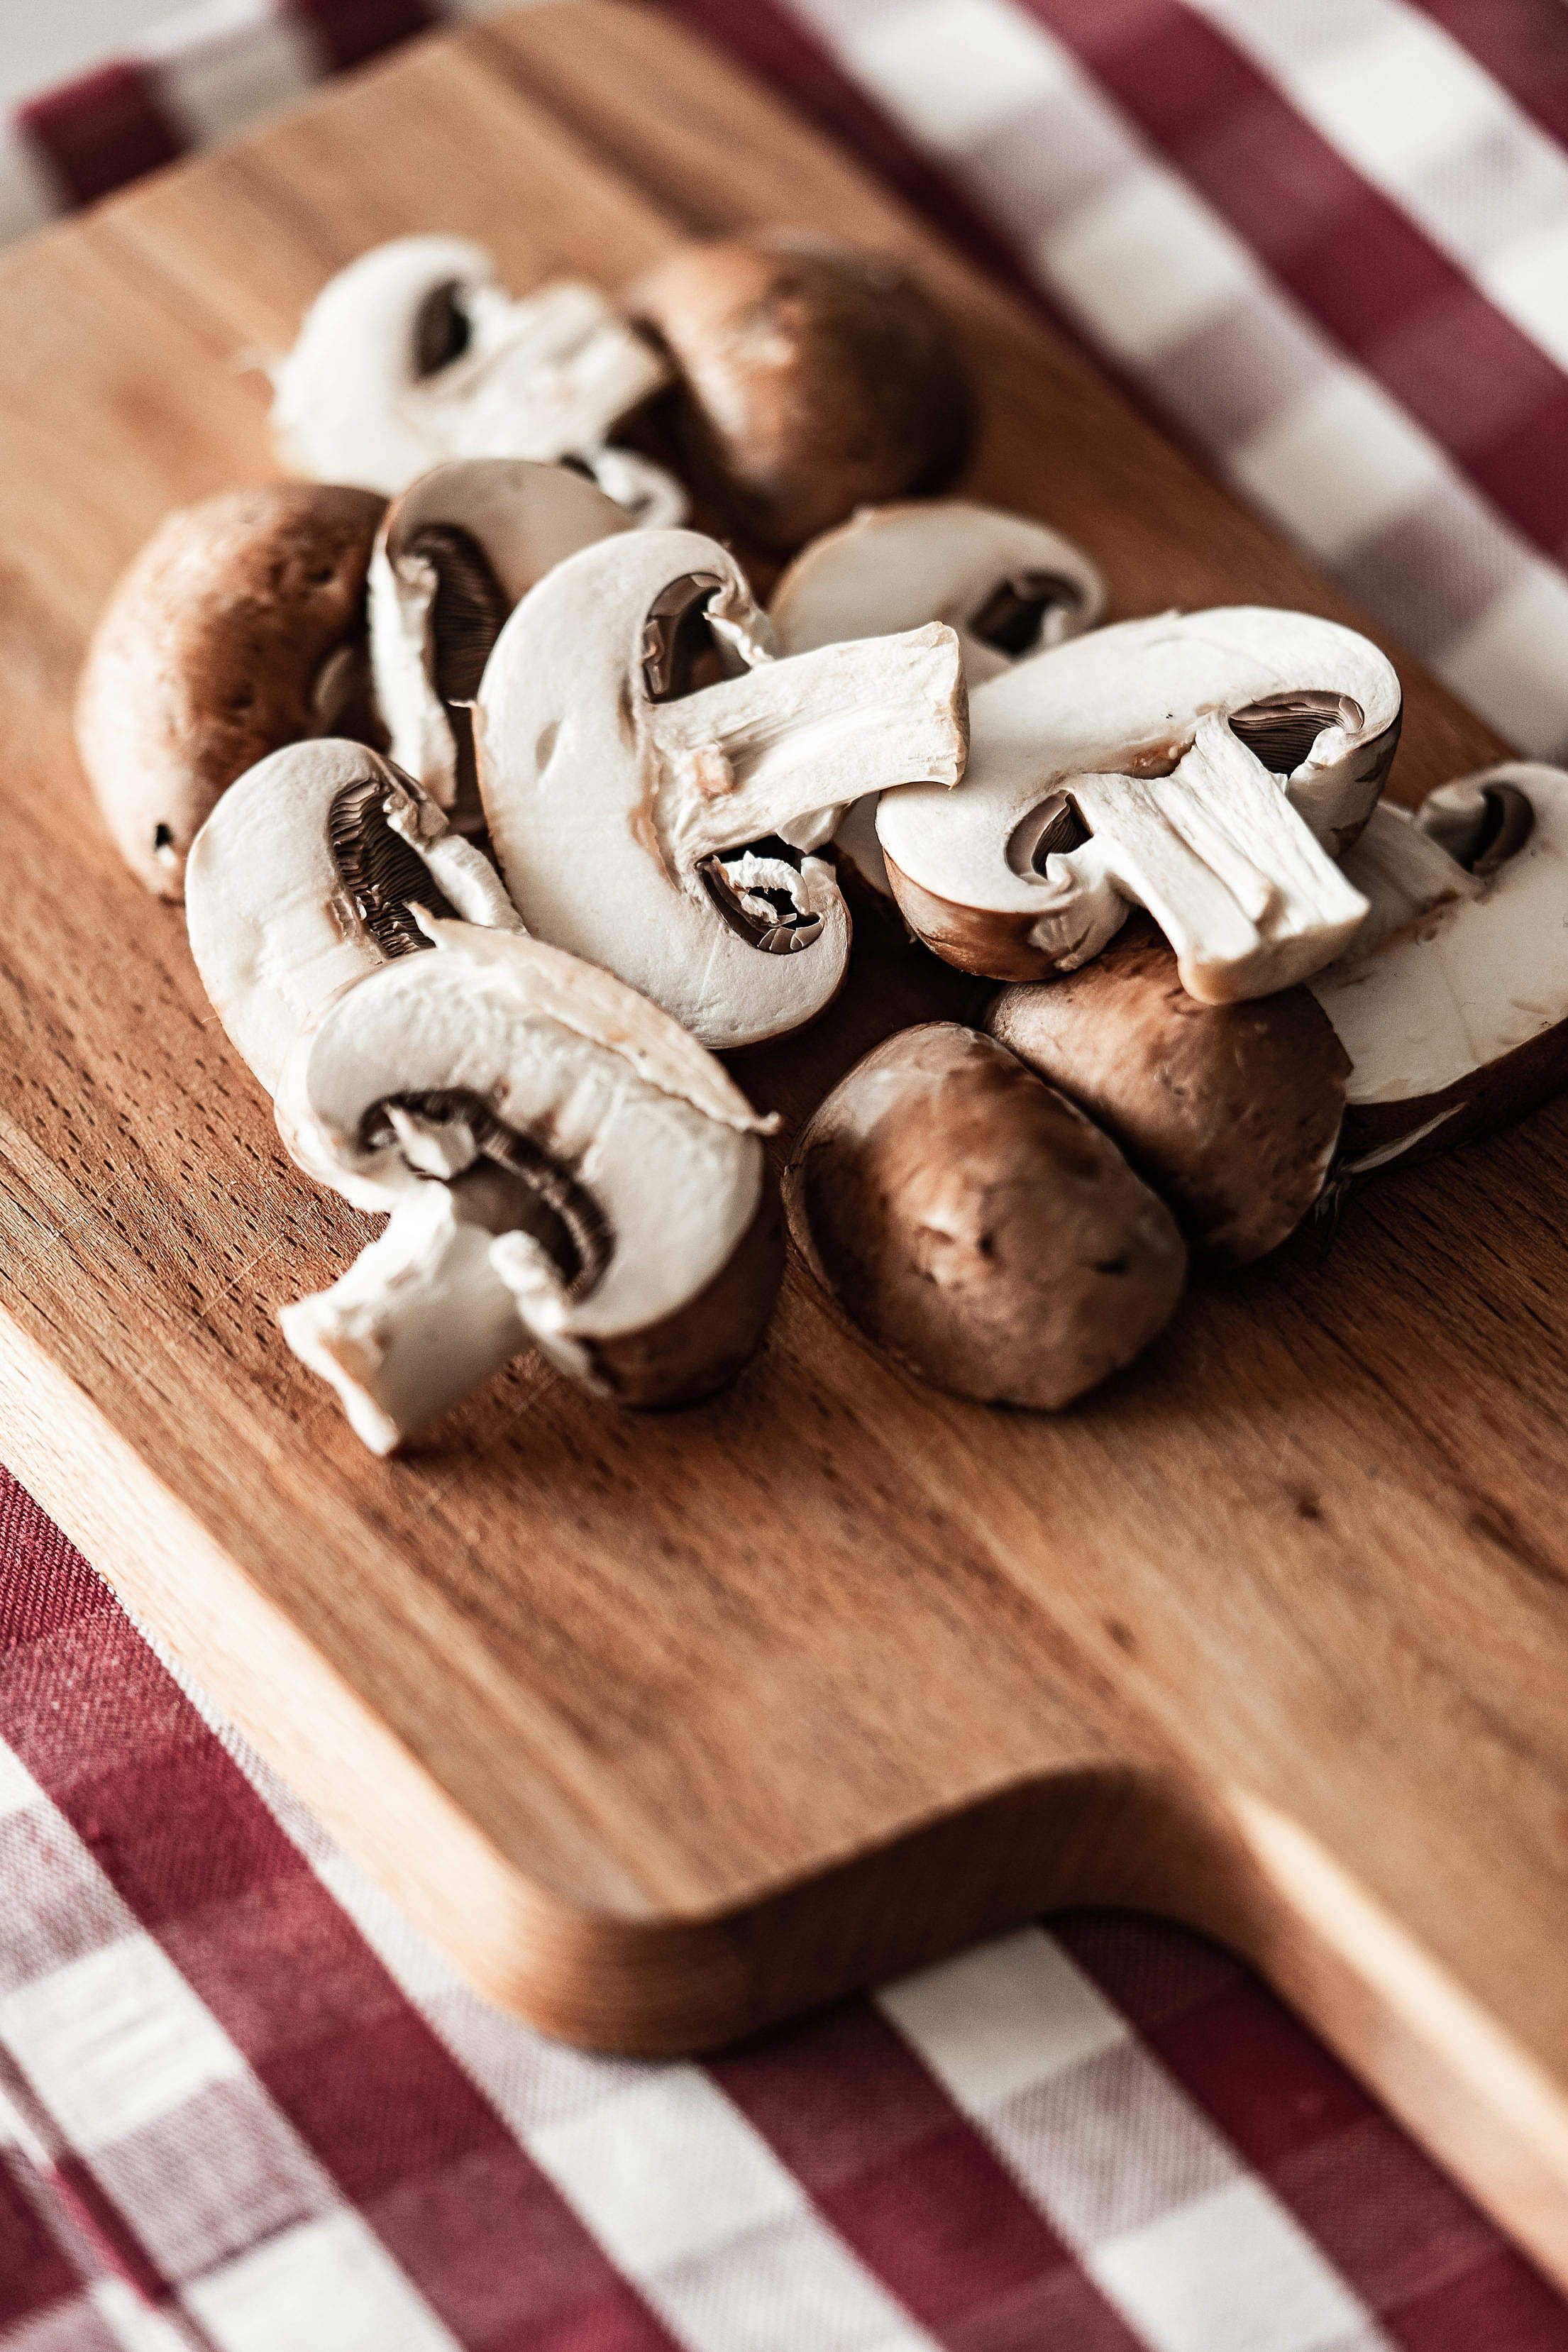 Slices of Mushrooms Vertical Free Stock Photo